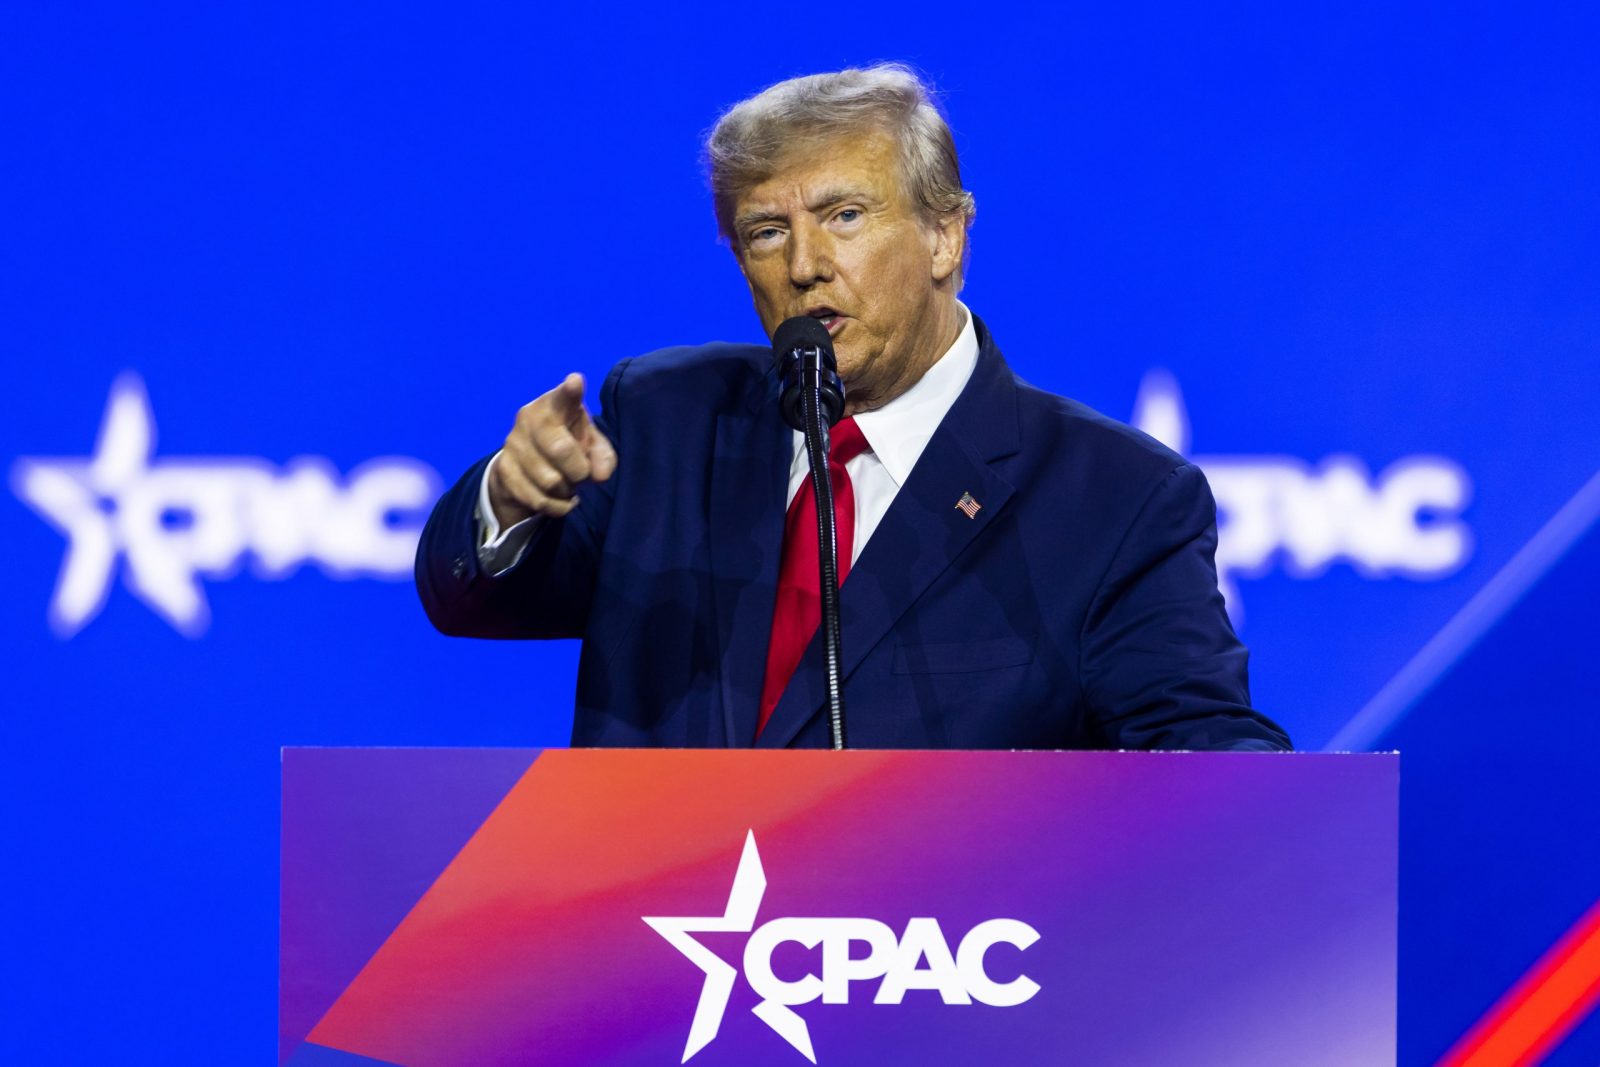 epa10503799 Former US President Donald Trump speaks at the Conservative Political Action Conference (CPAC), billed as the largest conservative gathering in the world, at the Gaylord National Resort & Convention Center in National Harbor, Maryland, USA, 04 March 2023. Many conservatives skipped this year’s conference after a male campaign aid accused CPAC Chair Matt Schlapp of sexual assault.  EPA/JIM LO SCALZO